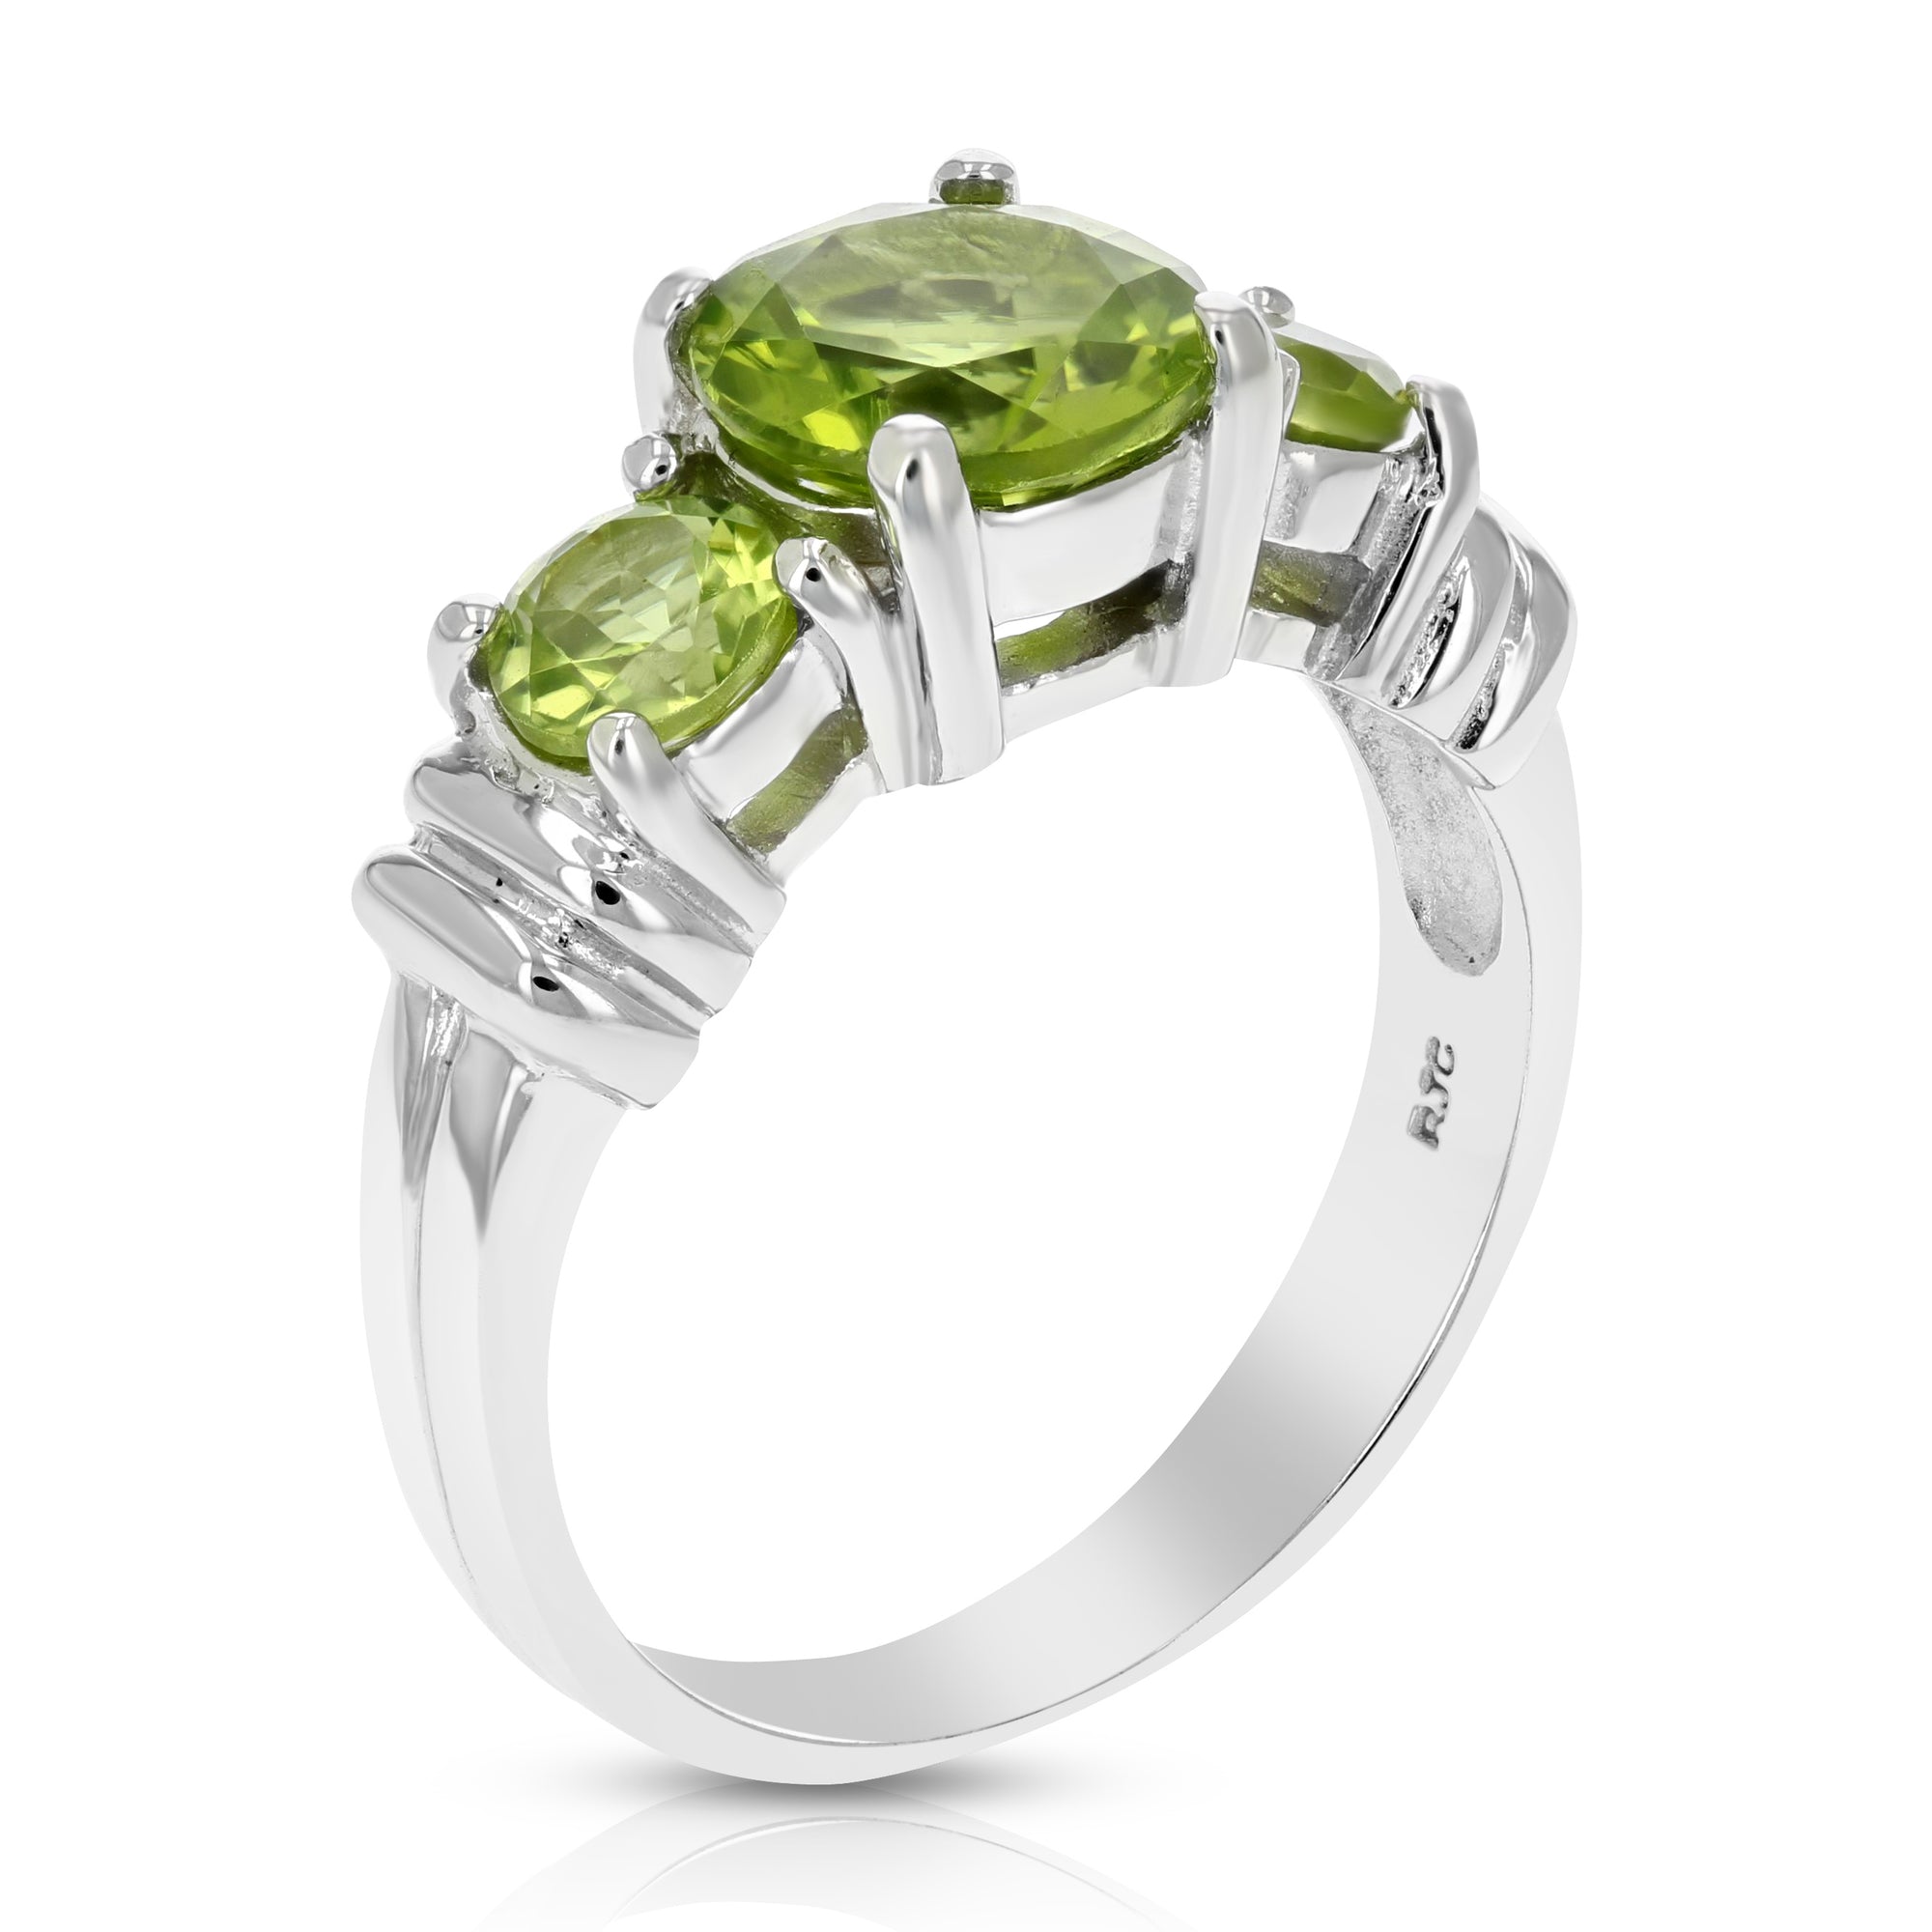 1.20 cttw 3 Stone Peridot Ring .925 Sterling Silver with Rhodium Plating Round